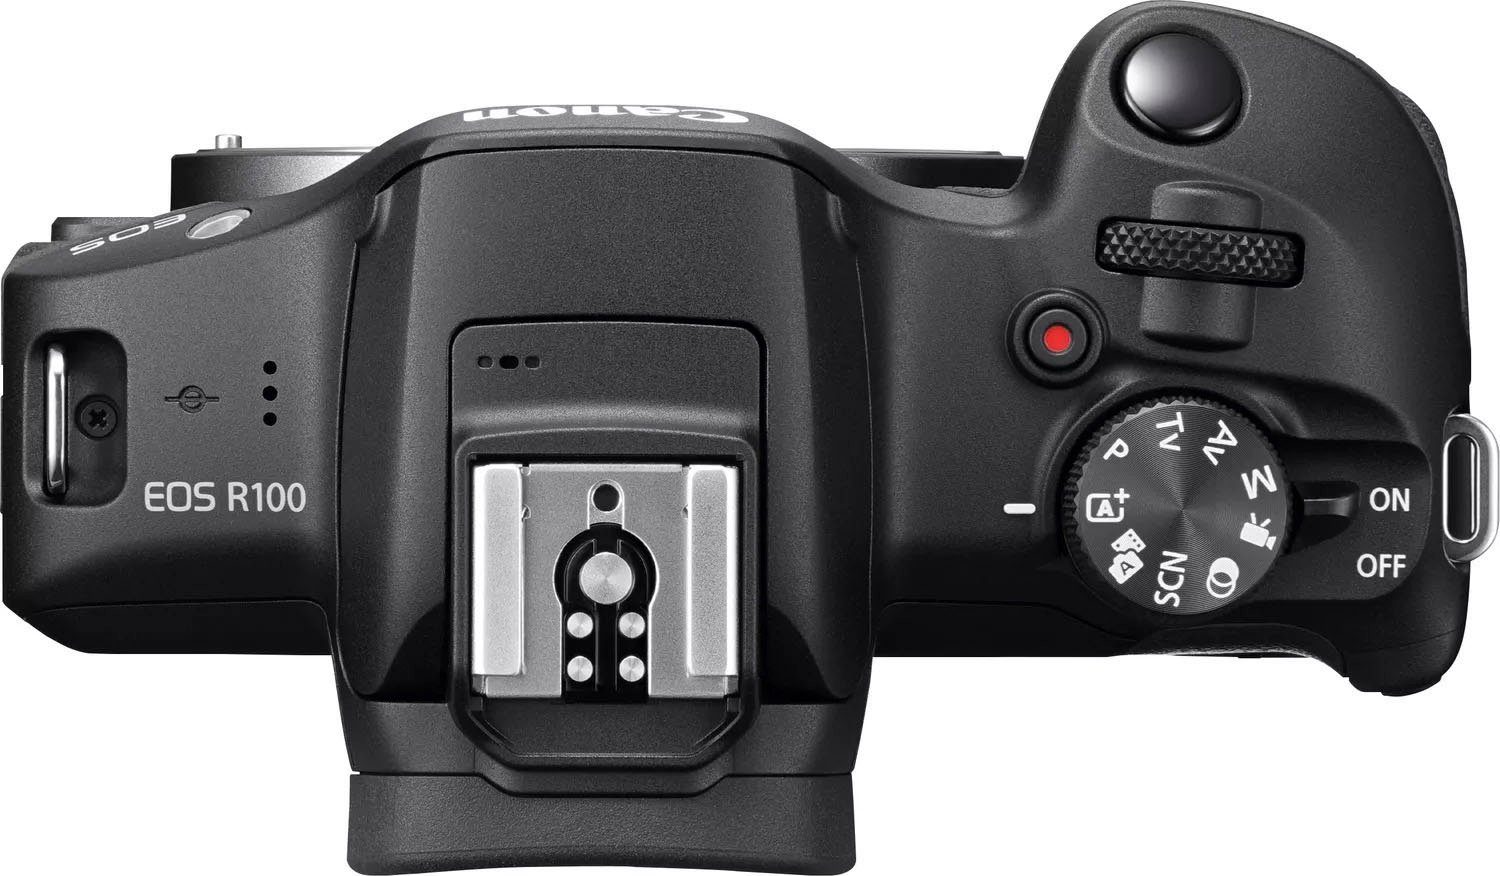 Canon EOS 24,1 Bluetooth, Kit RF-S WLAN) 18-45mm IS + IS F4.5-6.3 (RF-S STM, Systemkamera F4.5-6.3 18-45mm MP, R100 STM